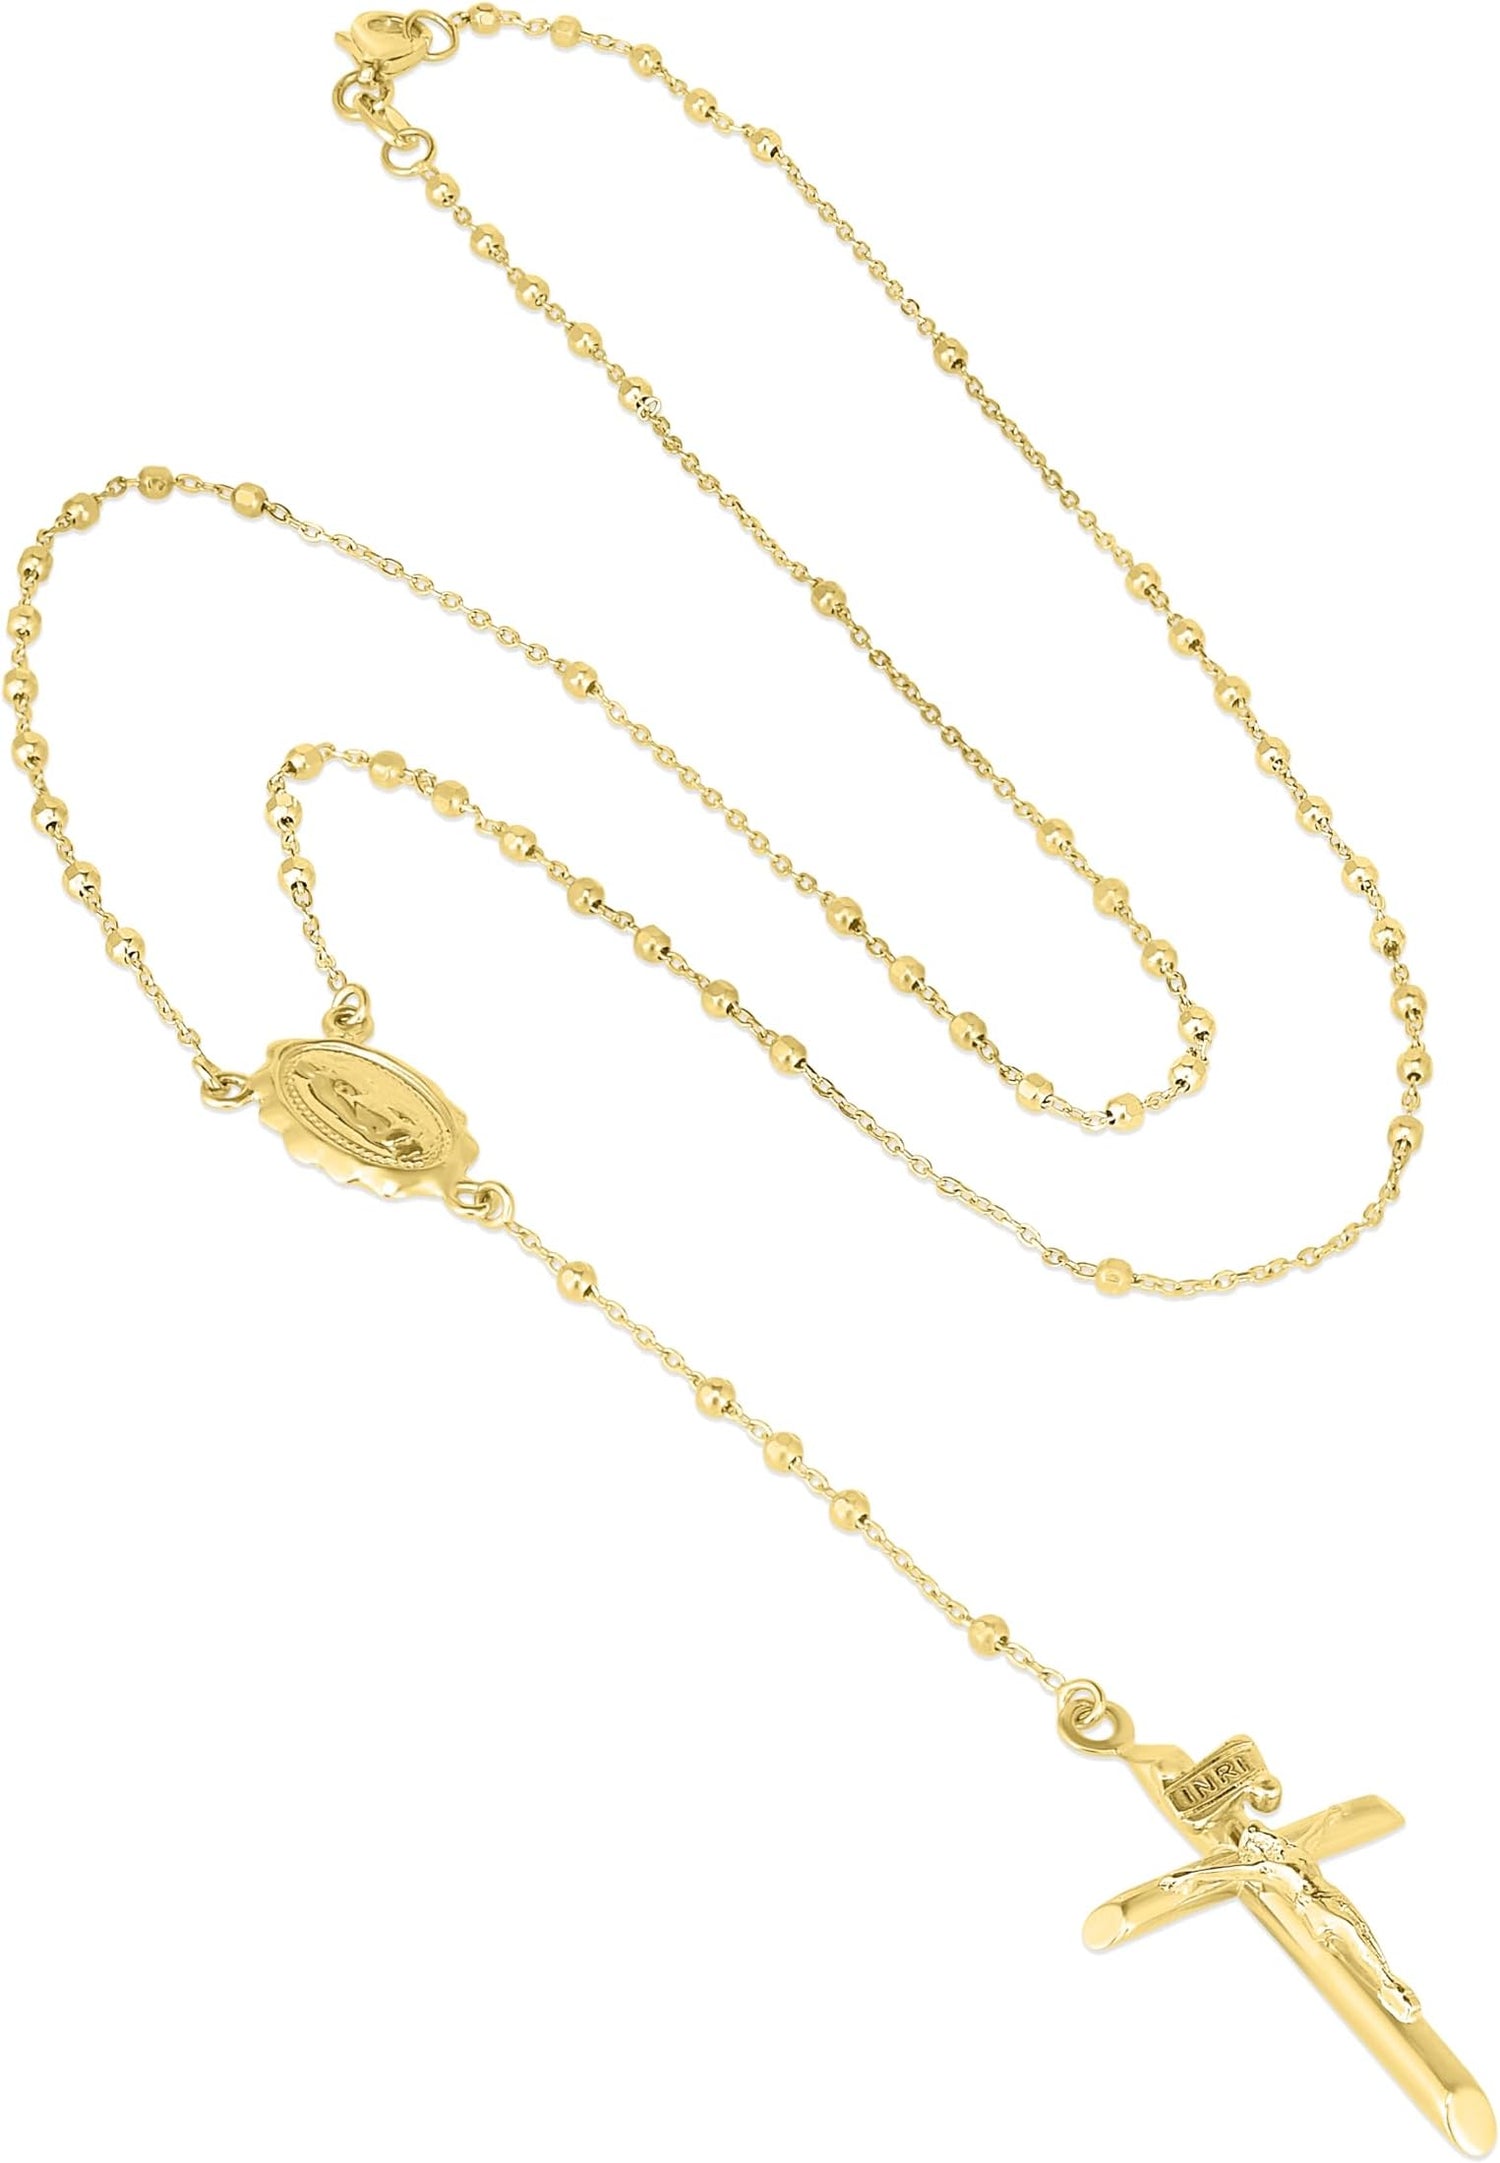 10k Yellow Gold or Tri Color 2mm Rosary with Virgin Mary Medal and Crucifix of Jesus Cross Pendant Chain Necklace